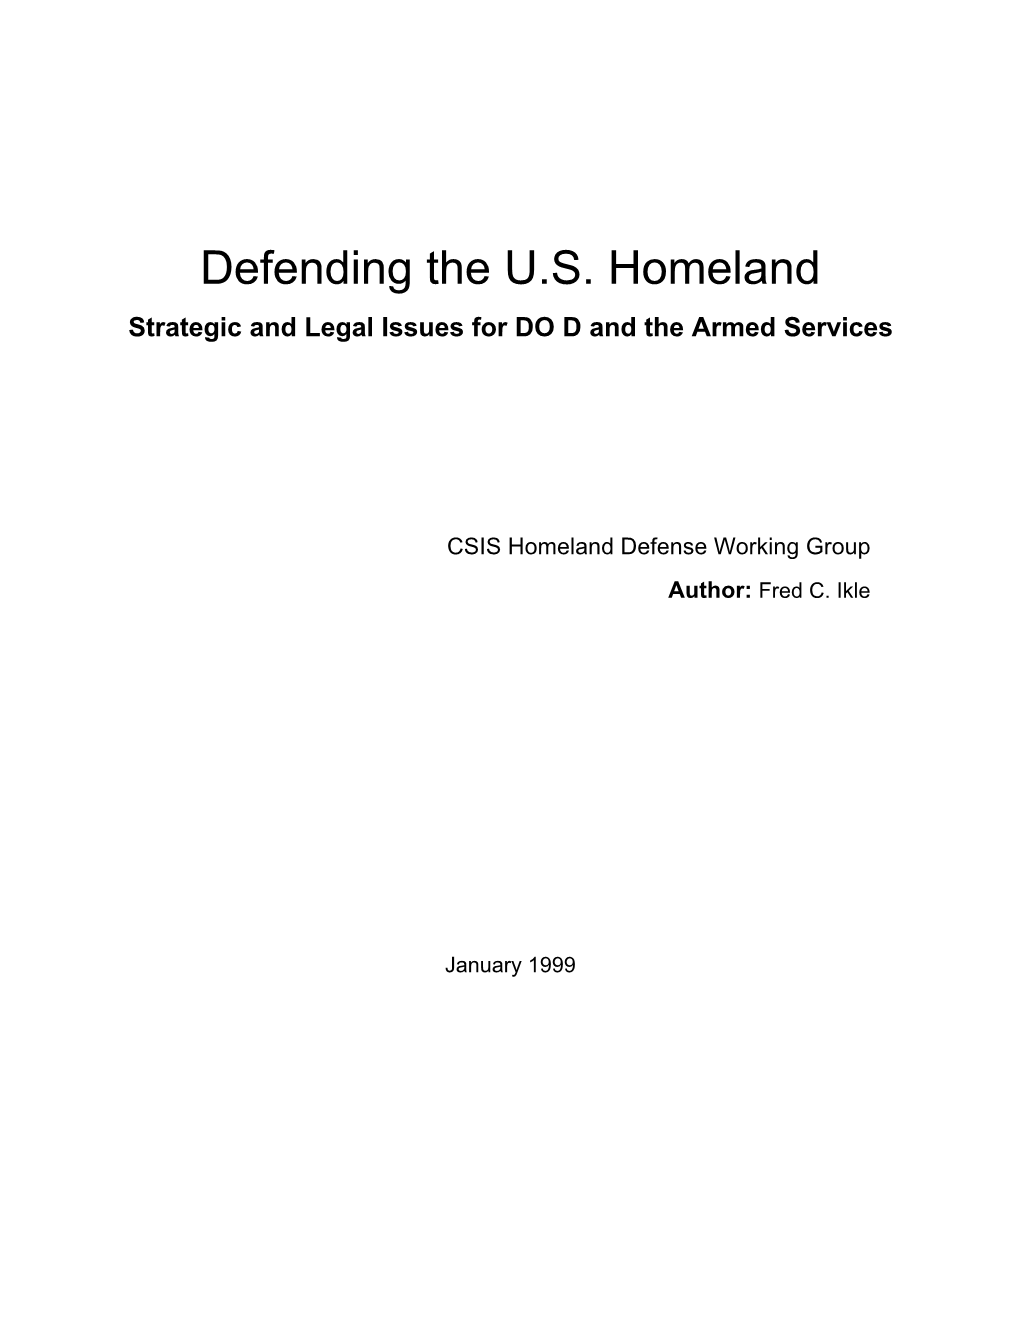 Defending the U.S. Homeland Strategic and Legal Issues for DO D and the Armed Services